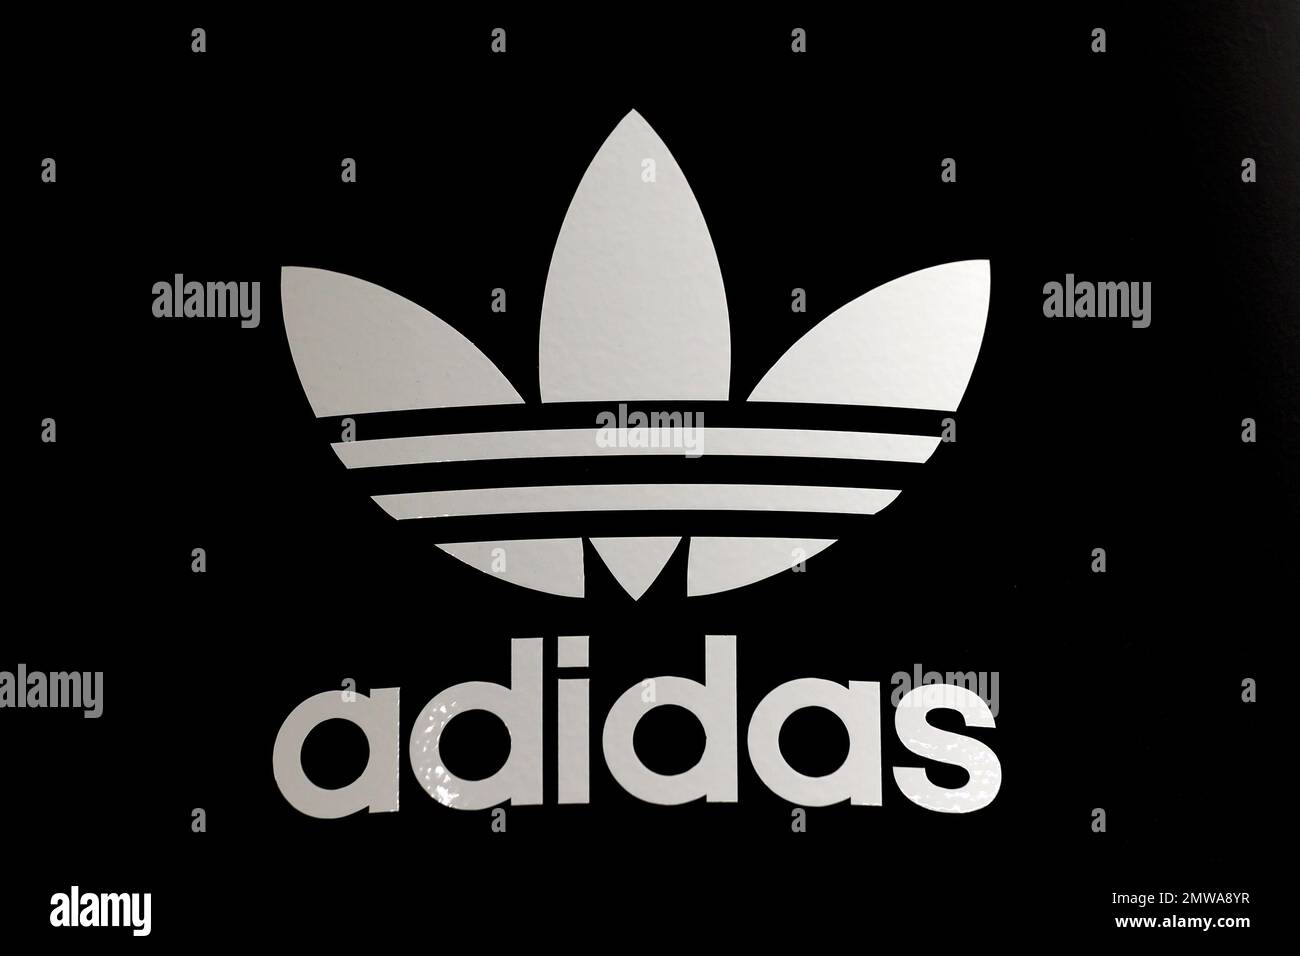 Adidas logo on a wall. Adidas is a German multinational that manufactures  sports shoes, clothing Stock Photo - Alamy